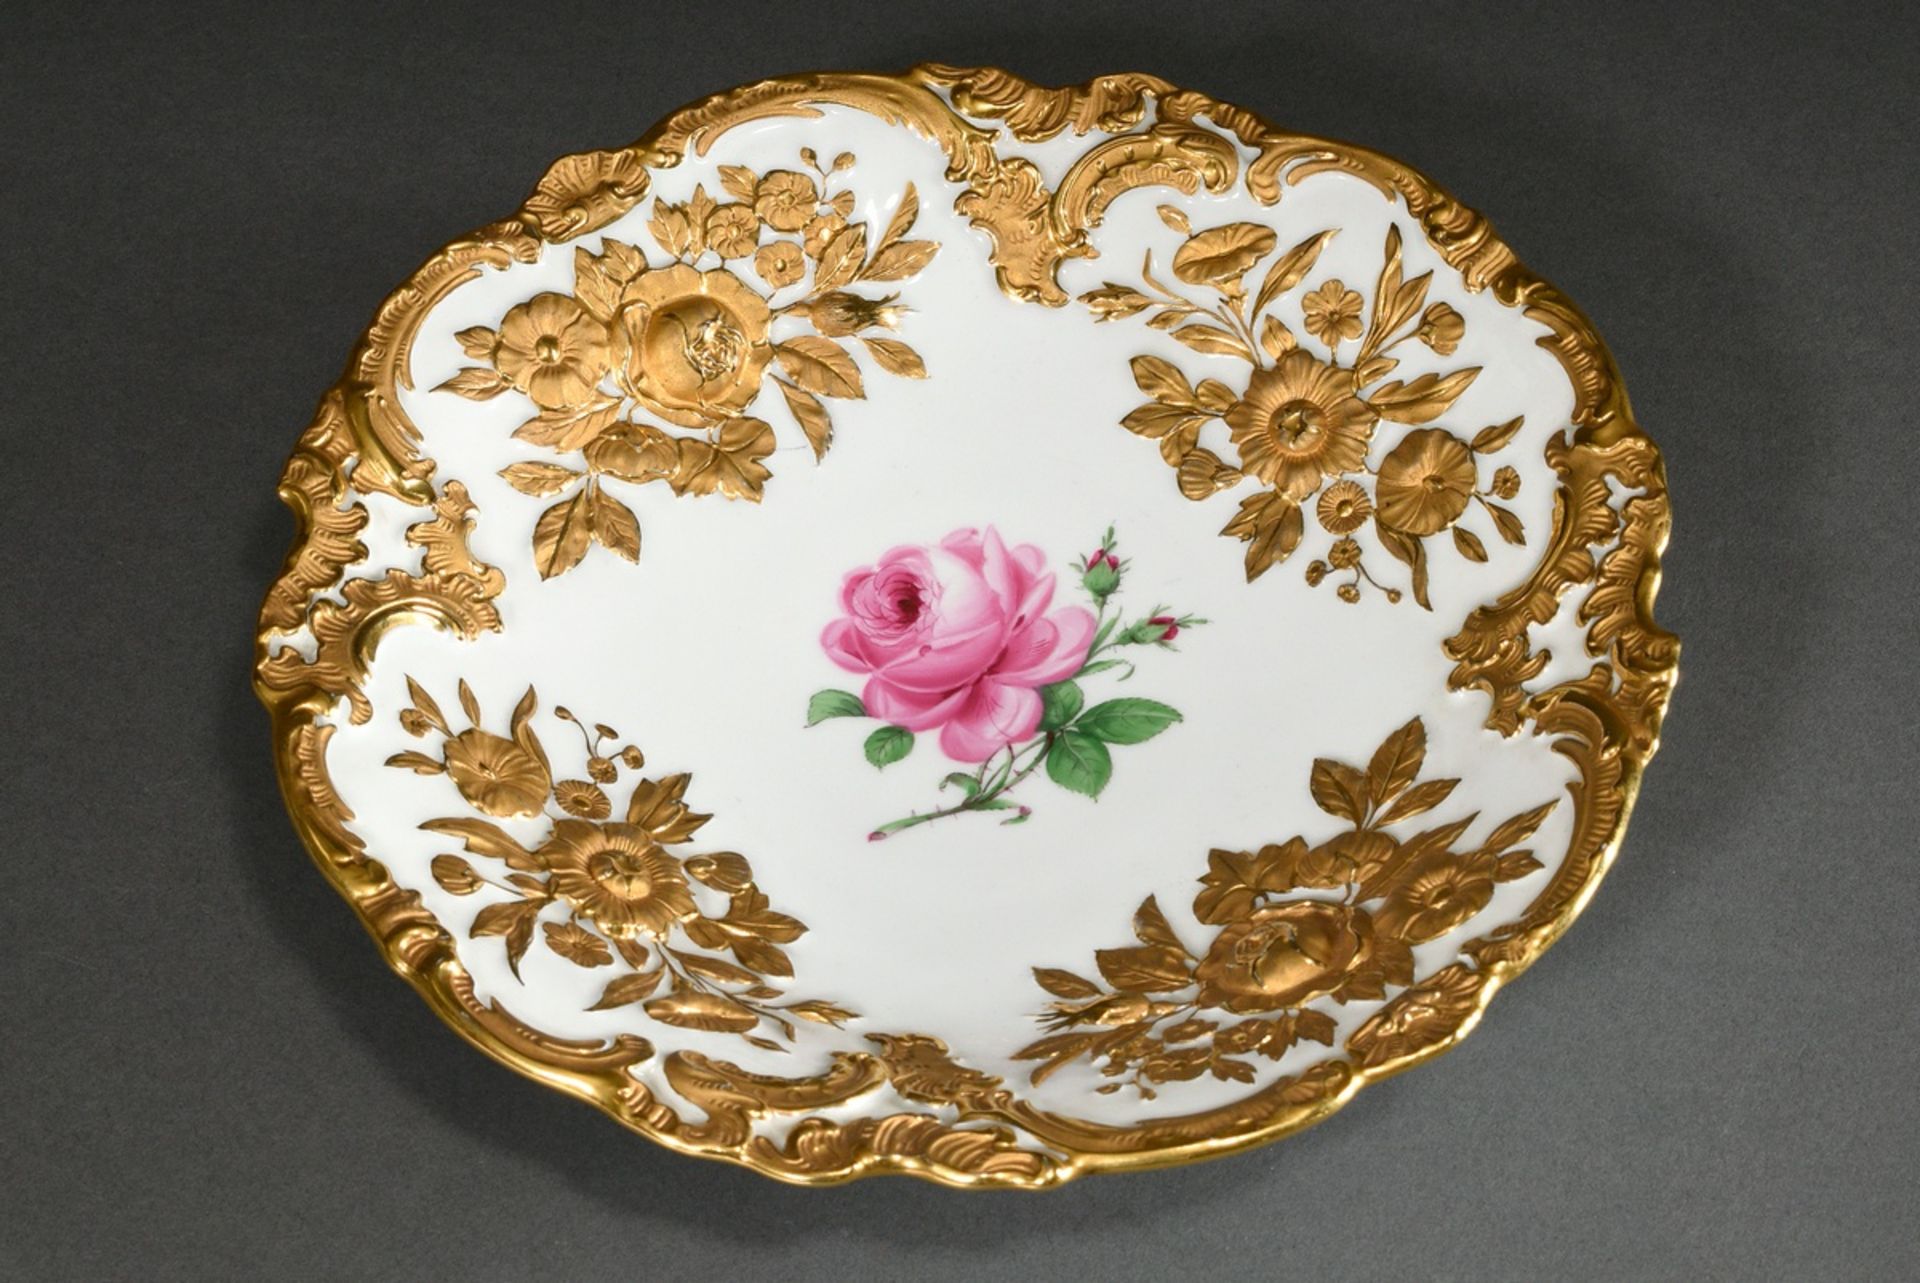 Magnificent Meissen "Rose" plate with richly gilded relief rim, Pfeifer period 1924-1934, model no. - Image 2 of 4